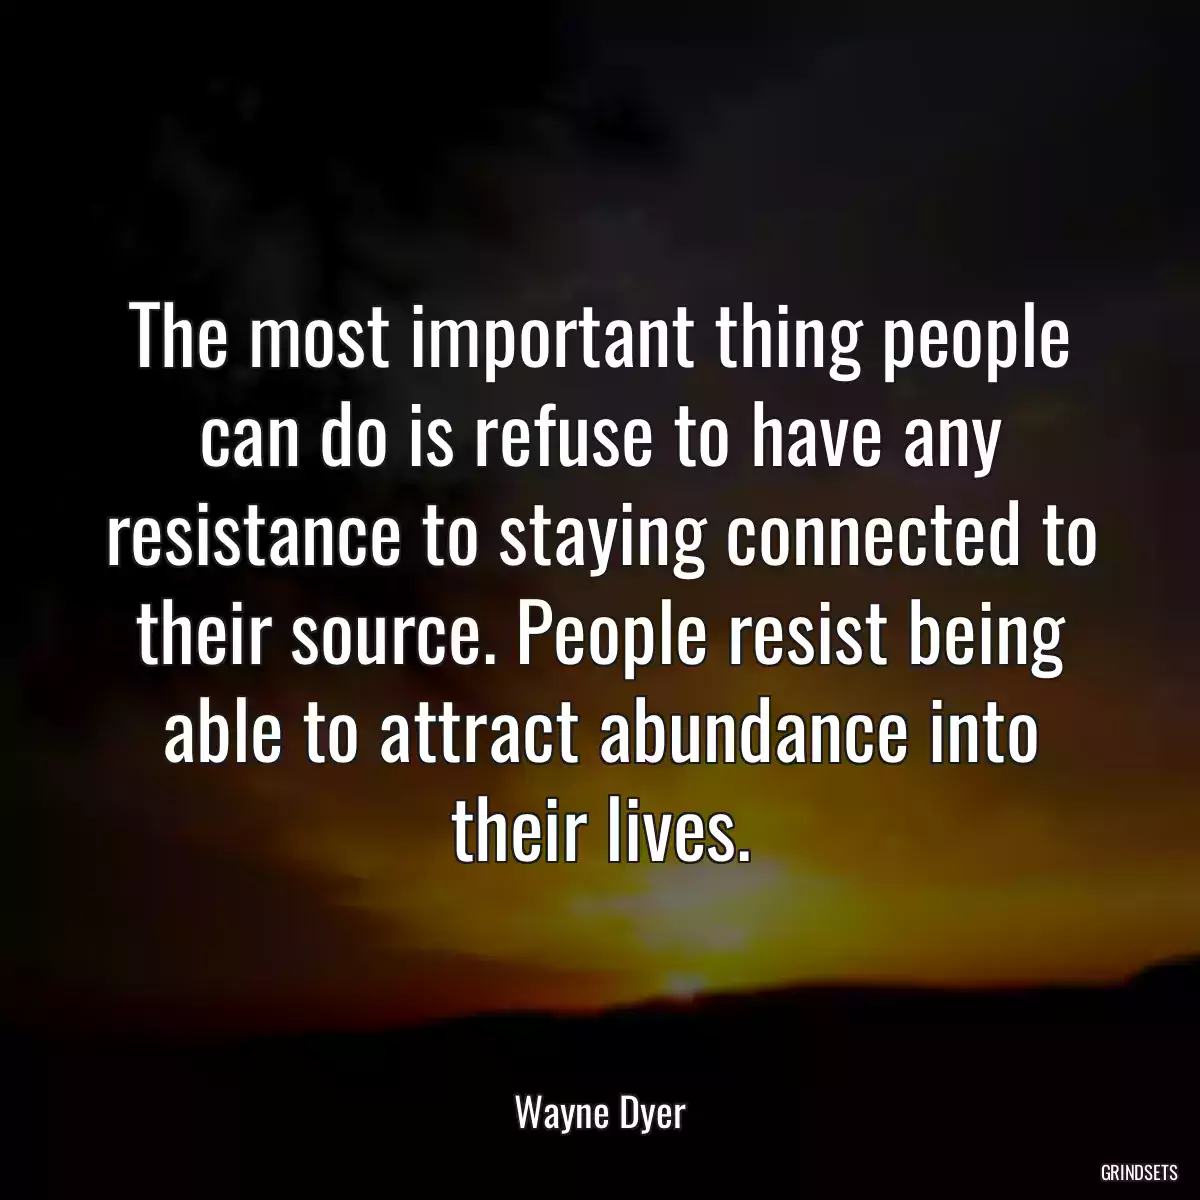 The most important thing people can do is refuse to have any resistance to staying connected to their source. People resist being able to attract abundance into their lives.